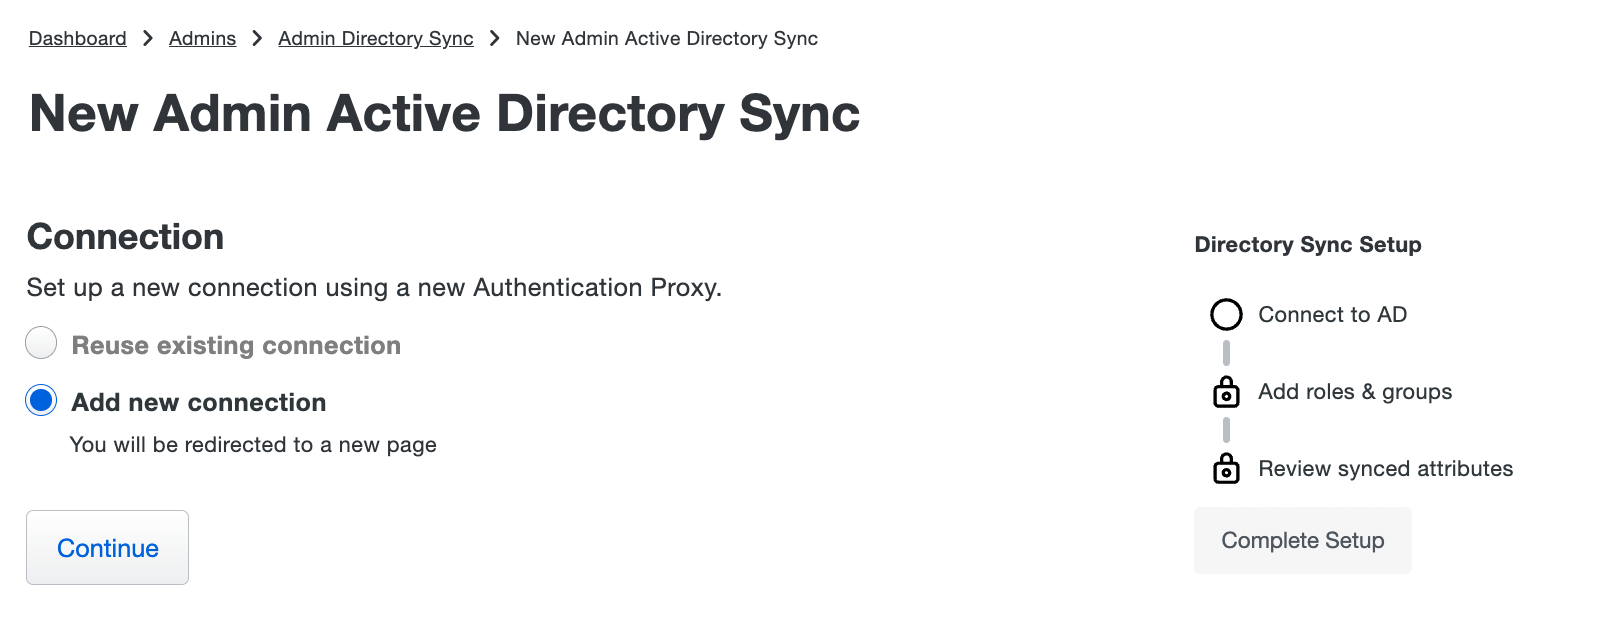 New Admin AD Sync Connection